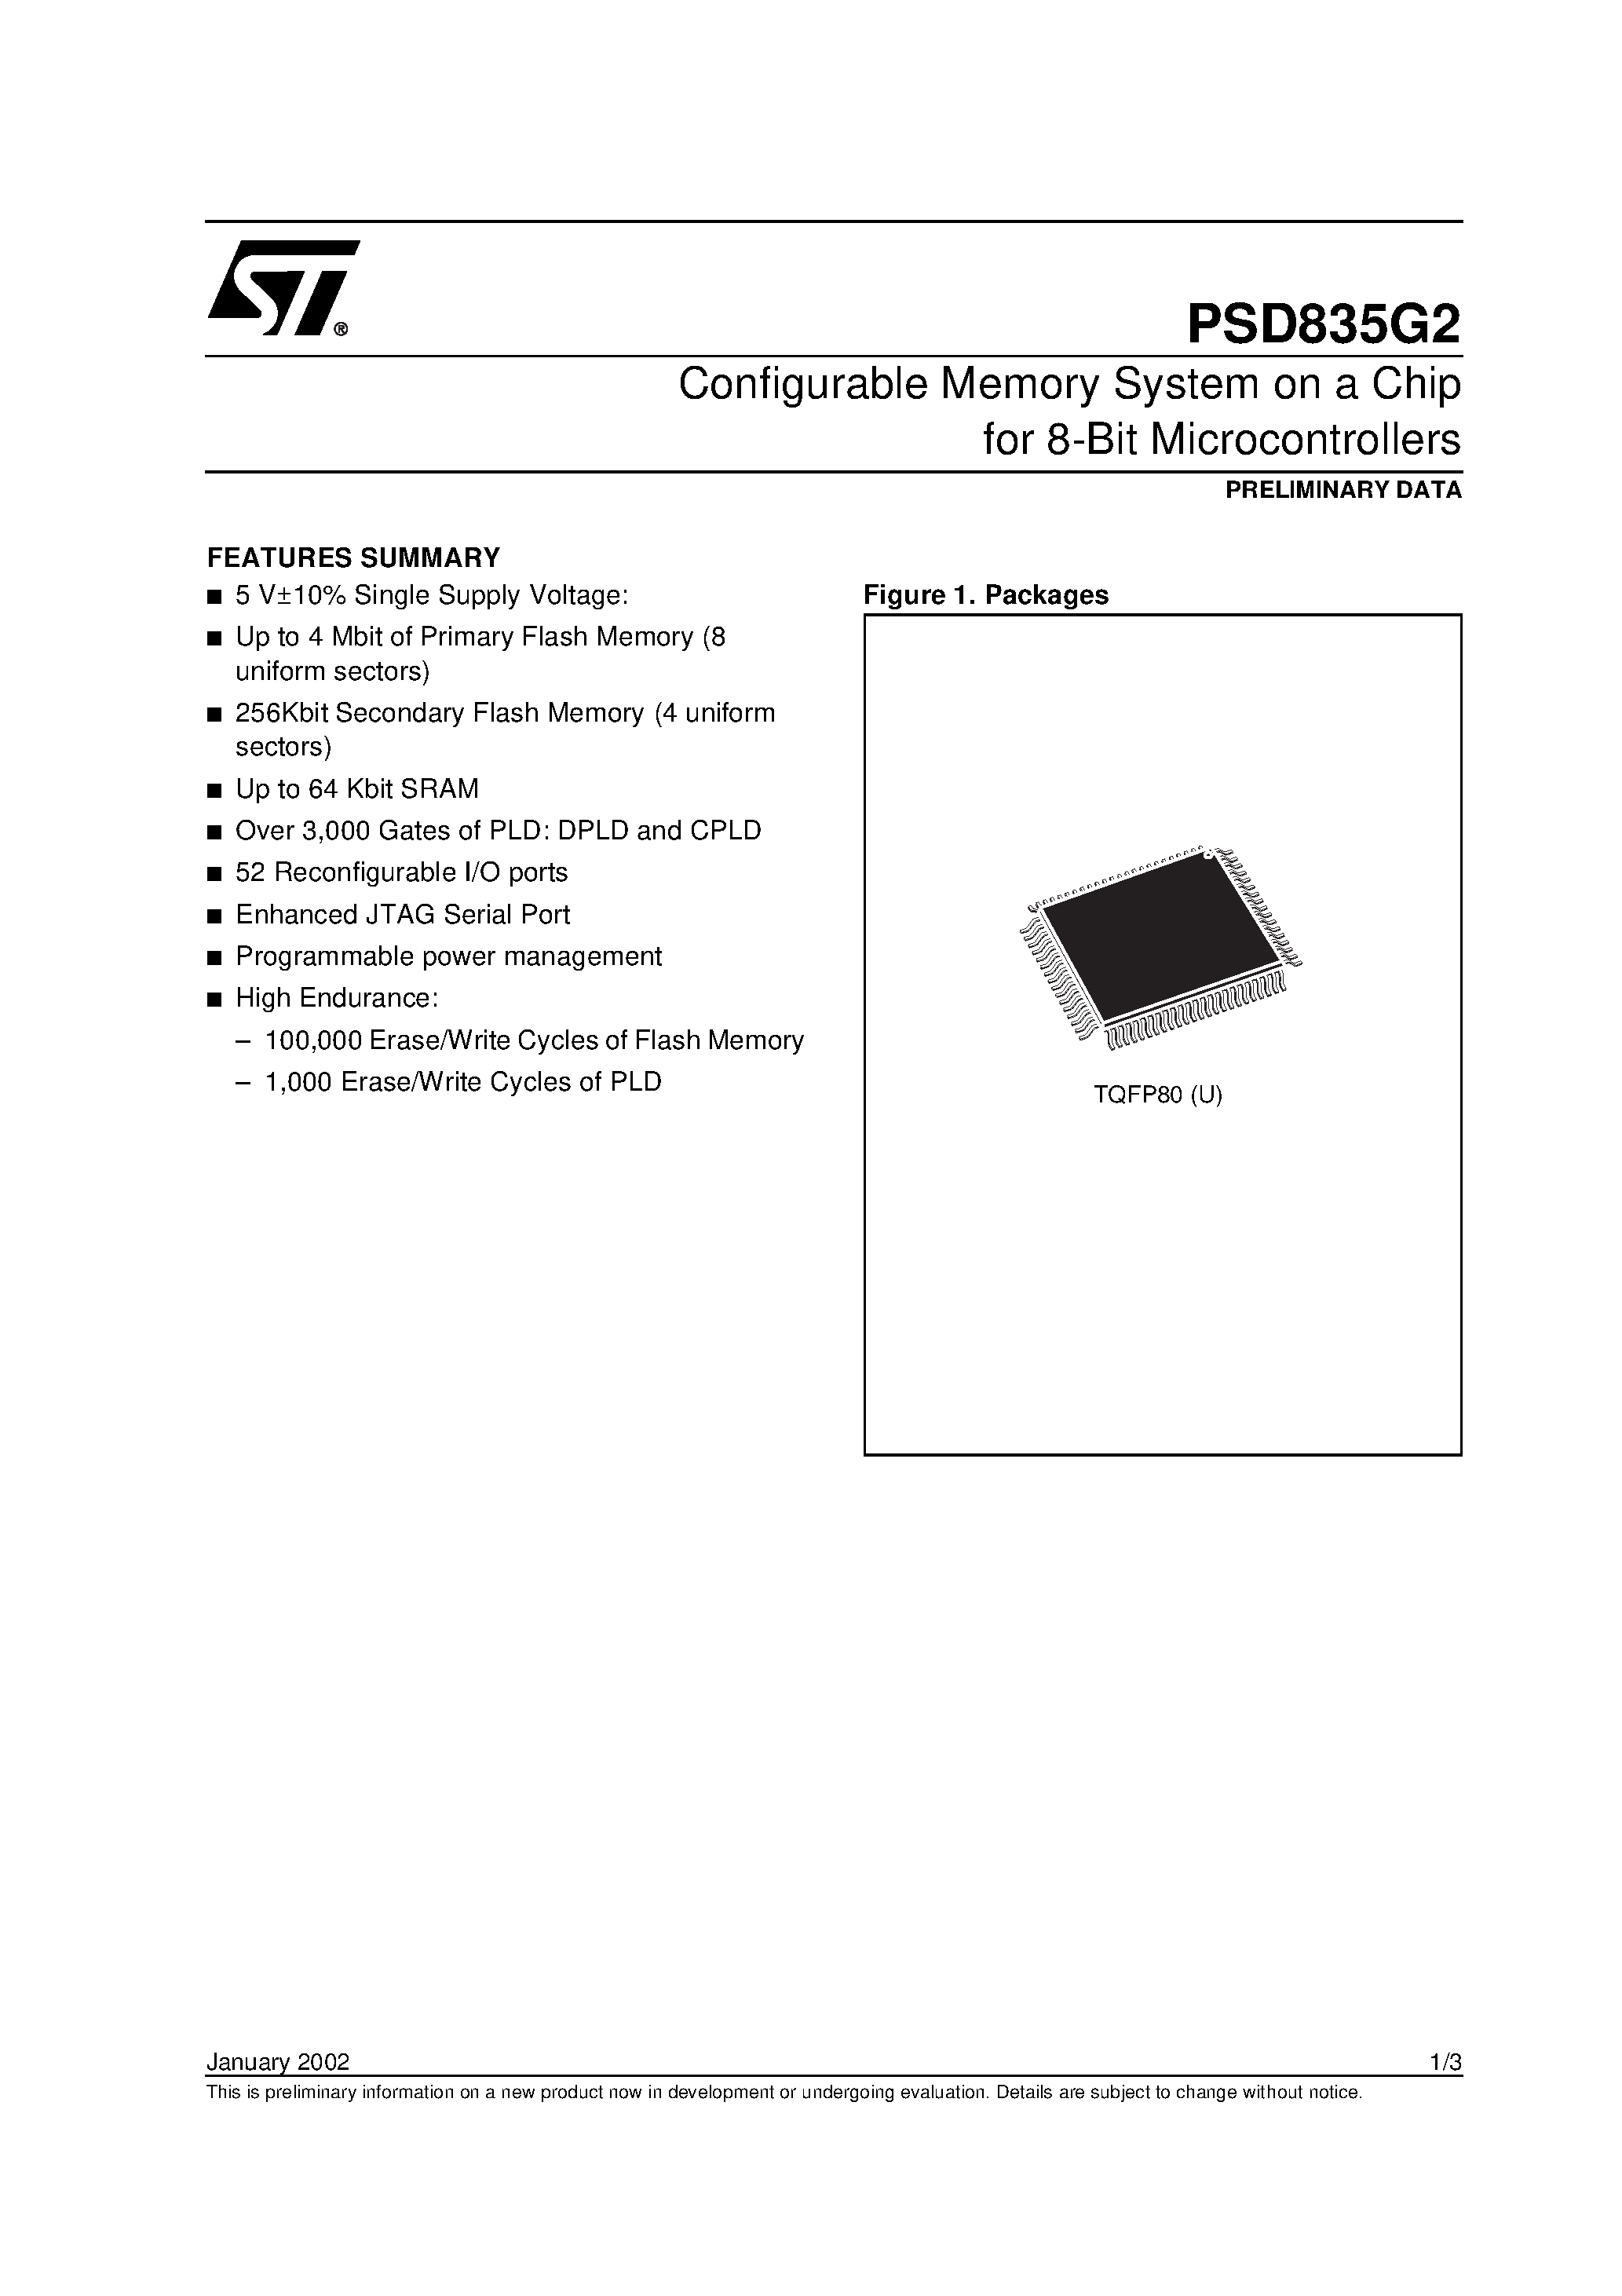 Datasheet PSD835F1-A-90U - Configurable Memory System on a Chip for 8-Bit Microcontrollers page 1